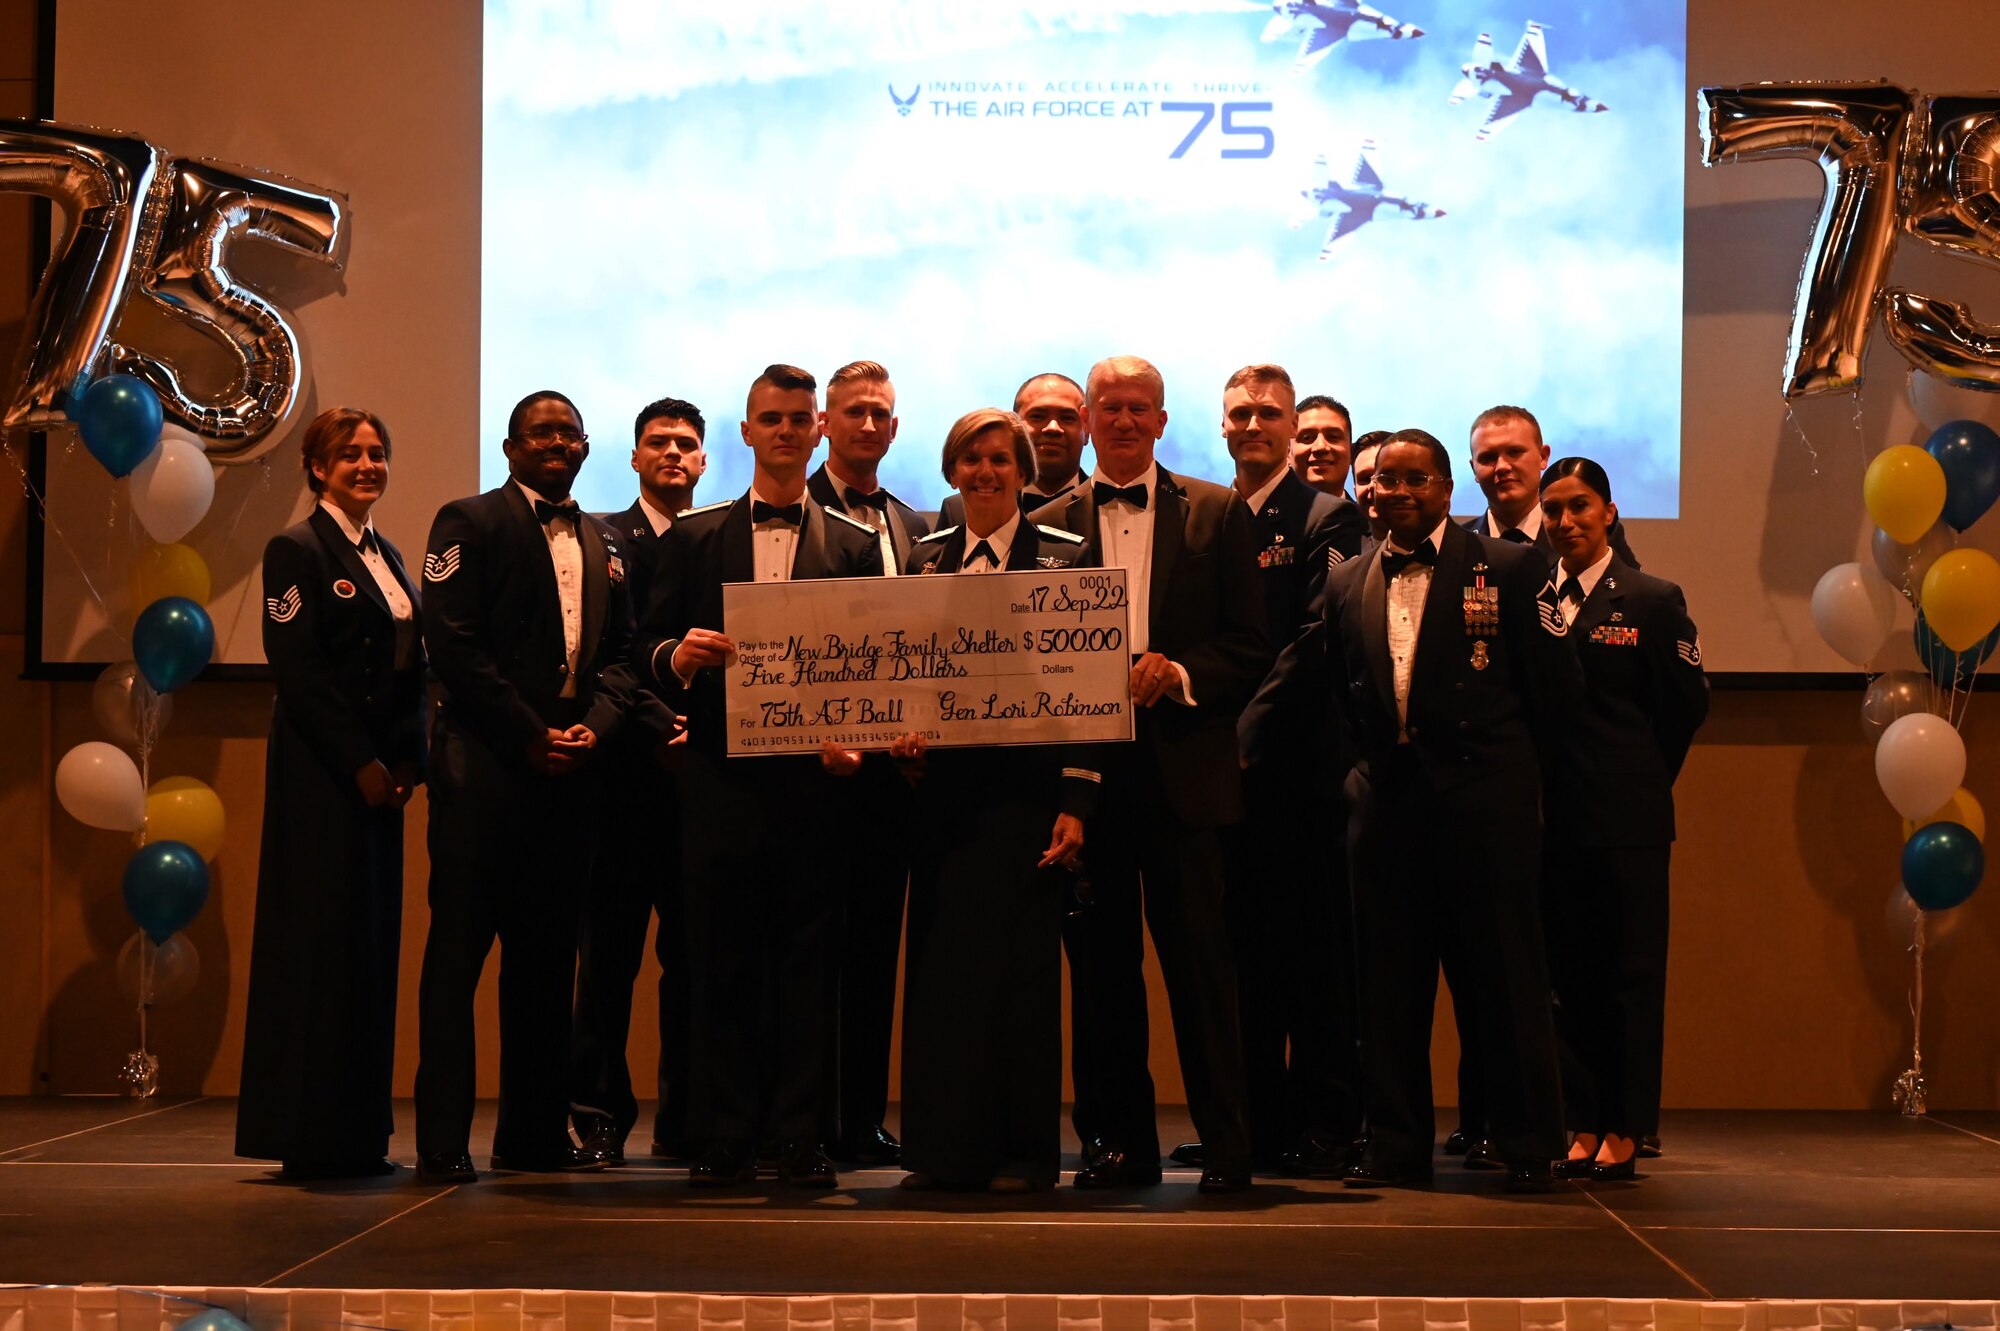 Retired U.S. Air Force Gen. Lori Robinson, guest speaker and former 17th Training Wing commander, receives a check on behalf of a charity from the Air Force Ball committee, during the annual Air Force Ball, at the McNease Convention Center, in San Angelo, Texas, Sept. 17, 2022. Over the past years, Goodfellow Air Force Base has trained more than 18,000 pilots, 60,000 firefighters, and 360,000 intelligence, surveillance, and reconnaissance warriors, serving at nearly every Department of Defense installation across the globe. (U.S. Air Force photo by Airman 1st Class Zachary Heimbuch)